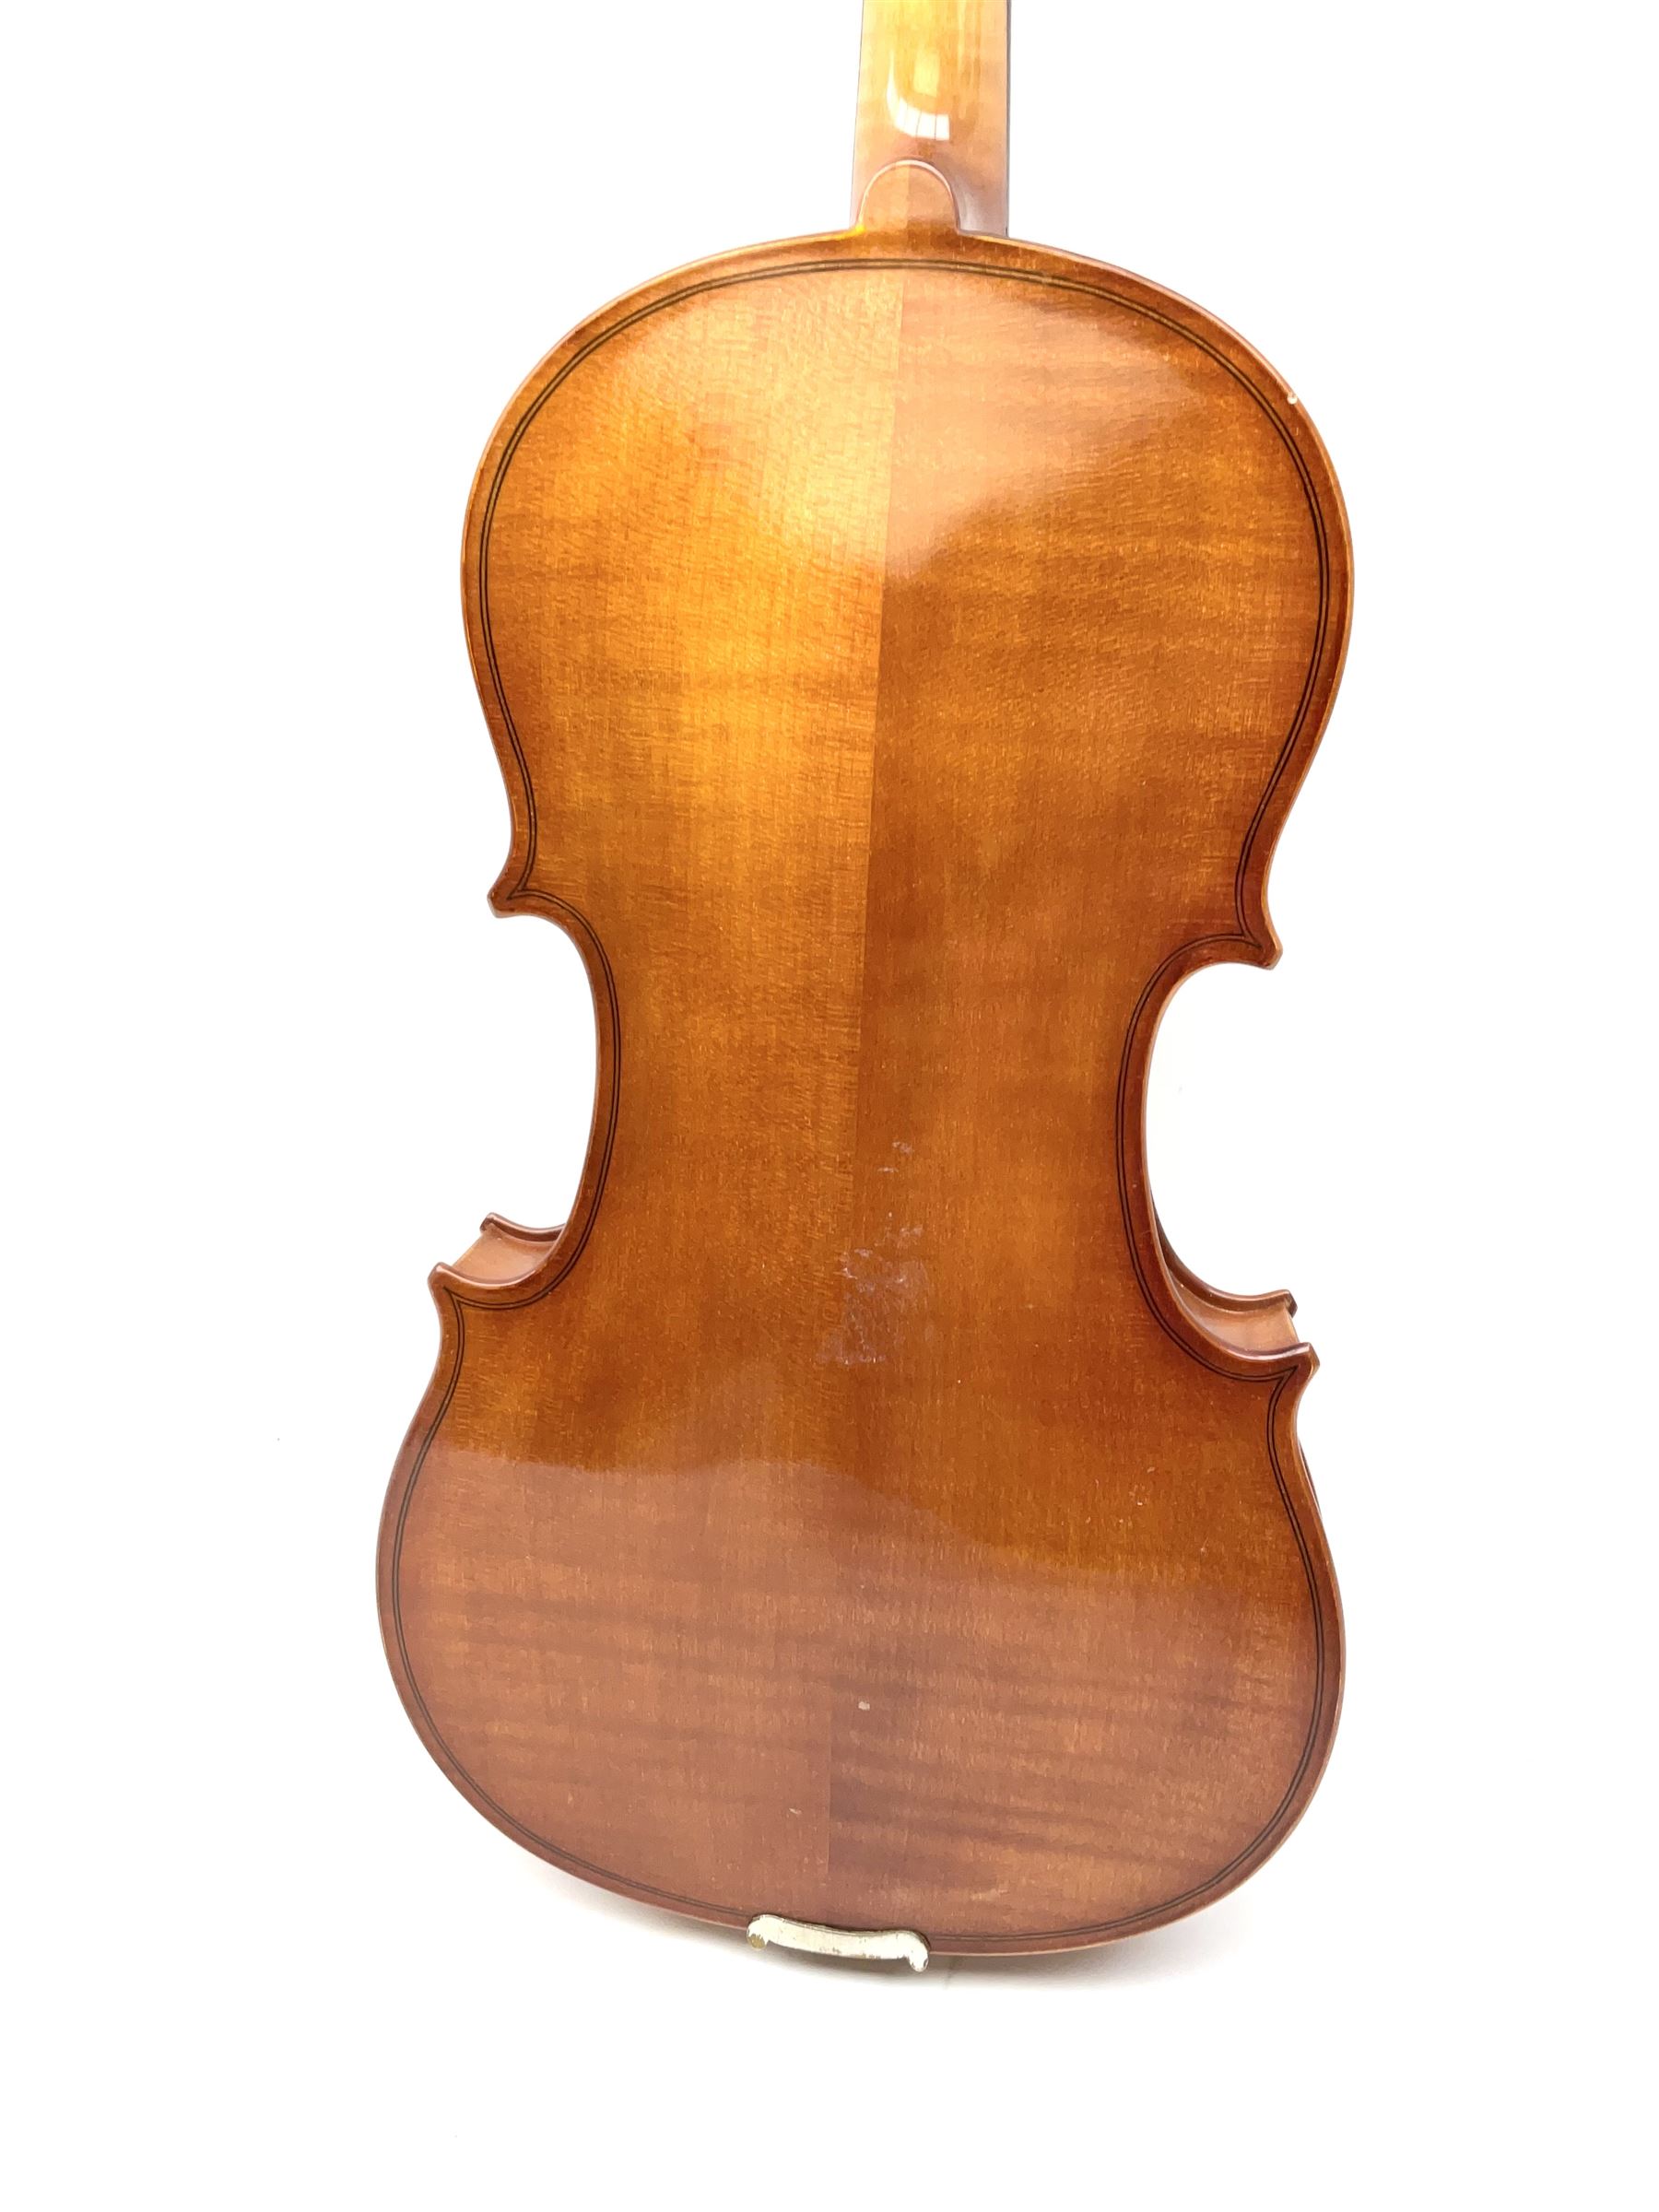 Modern violin with 36cm two-piece maple back and ribs and spruce top 60cm overall - Image 12 of 16